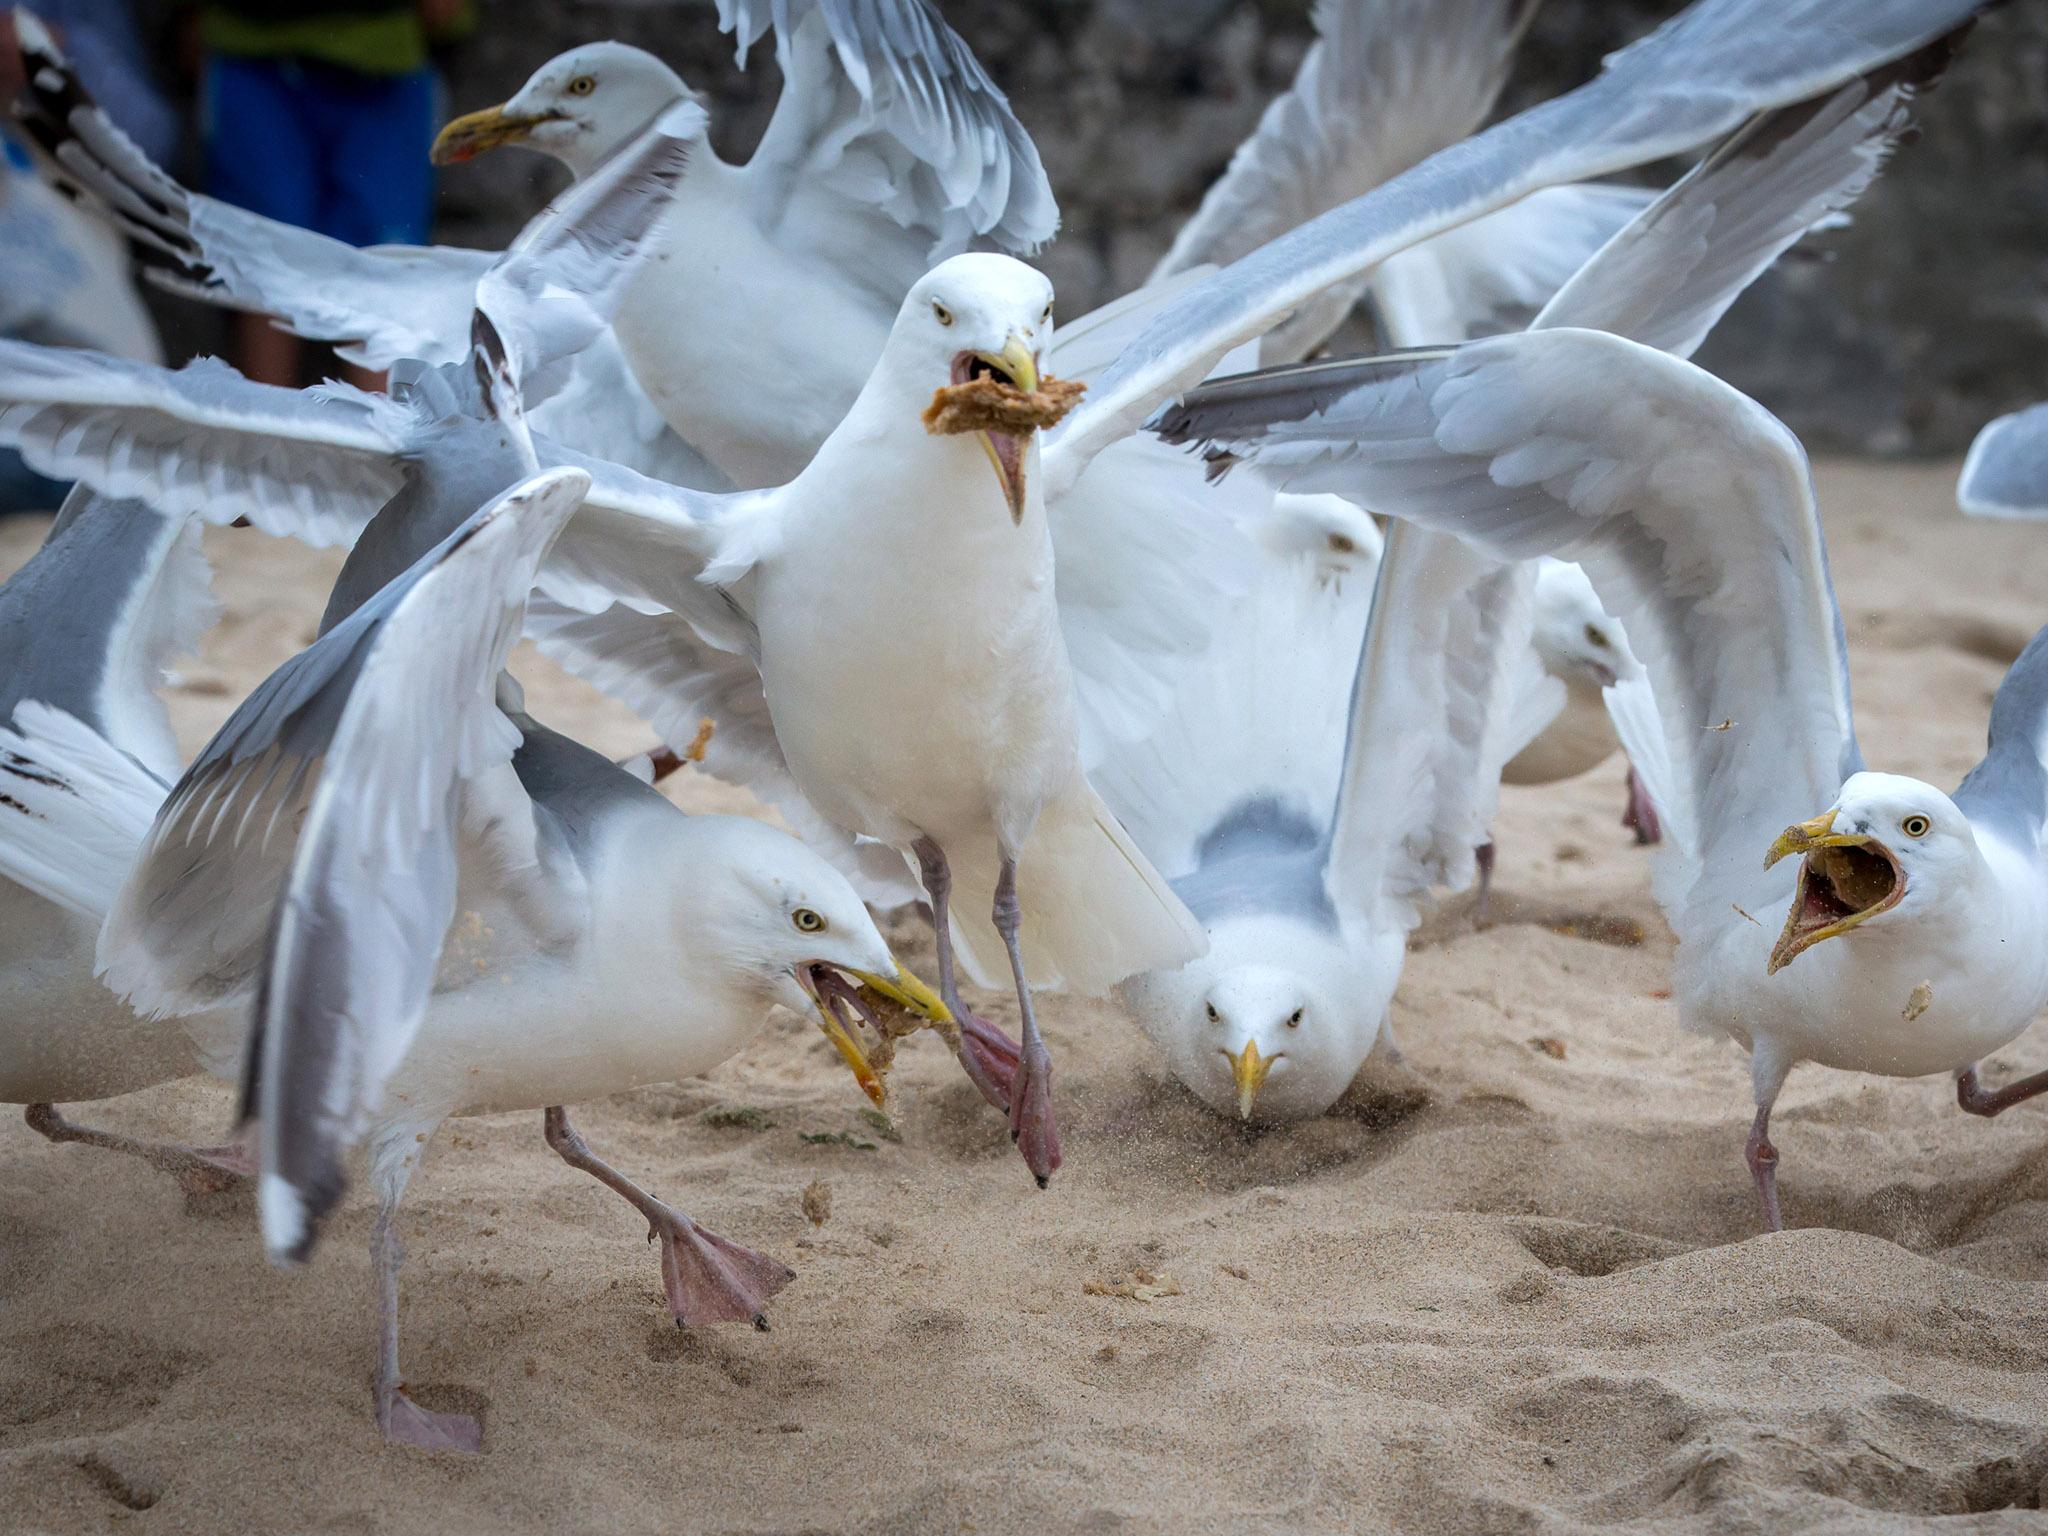 Ruffled feathers: angry Britons' battle with dive-bombing seagulls ...